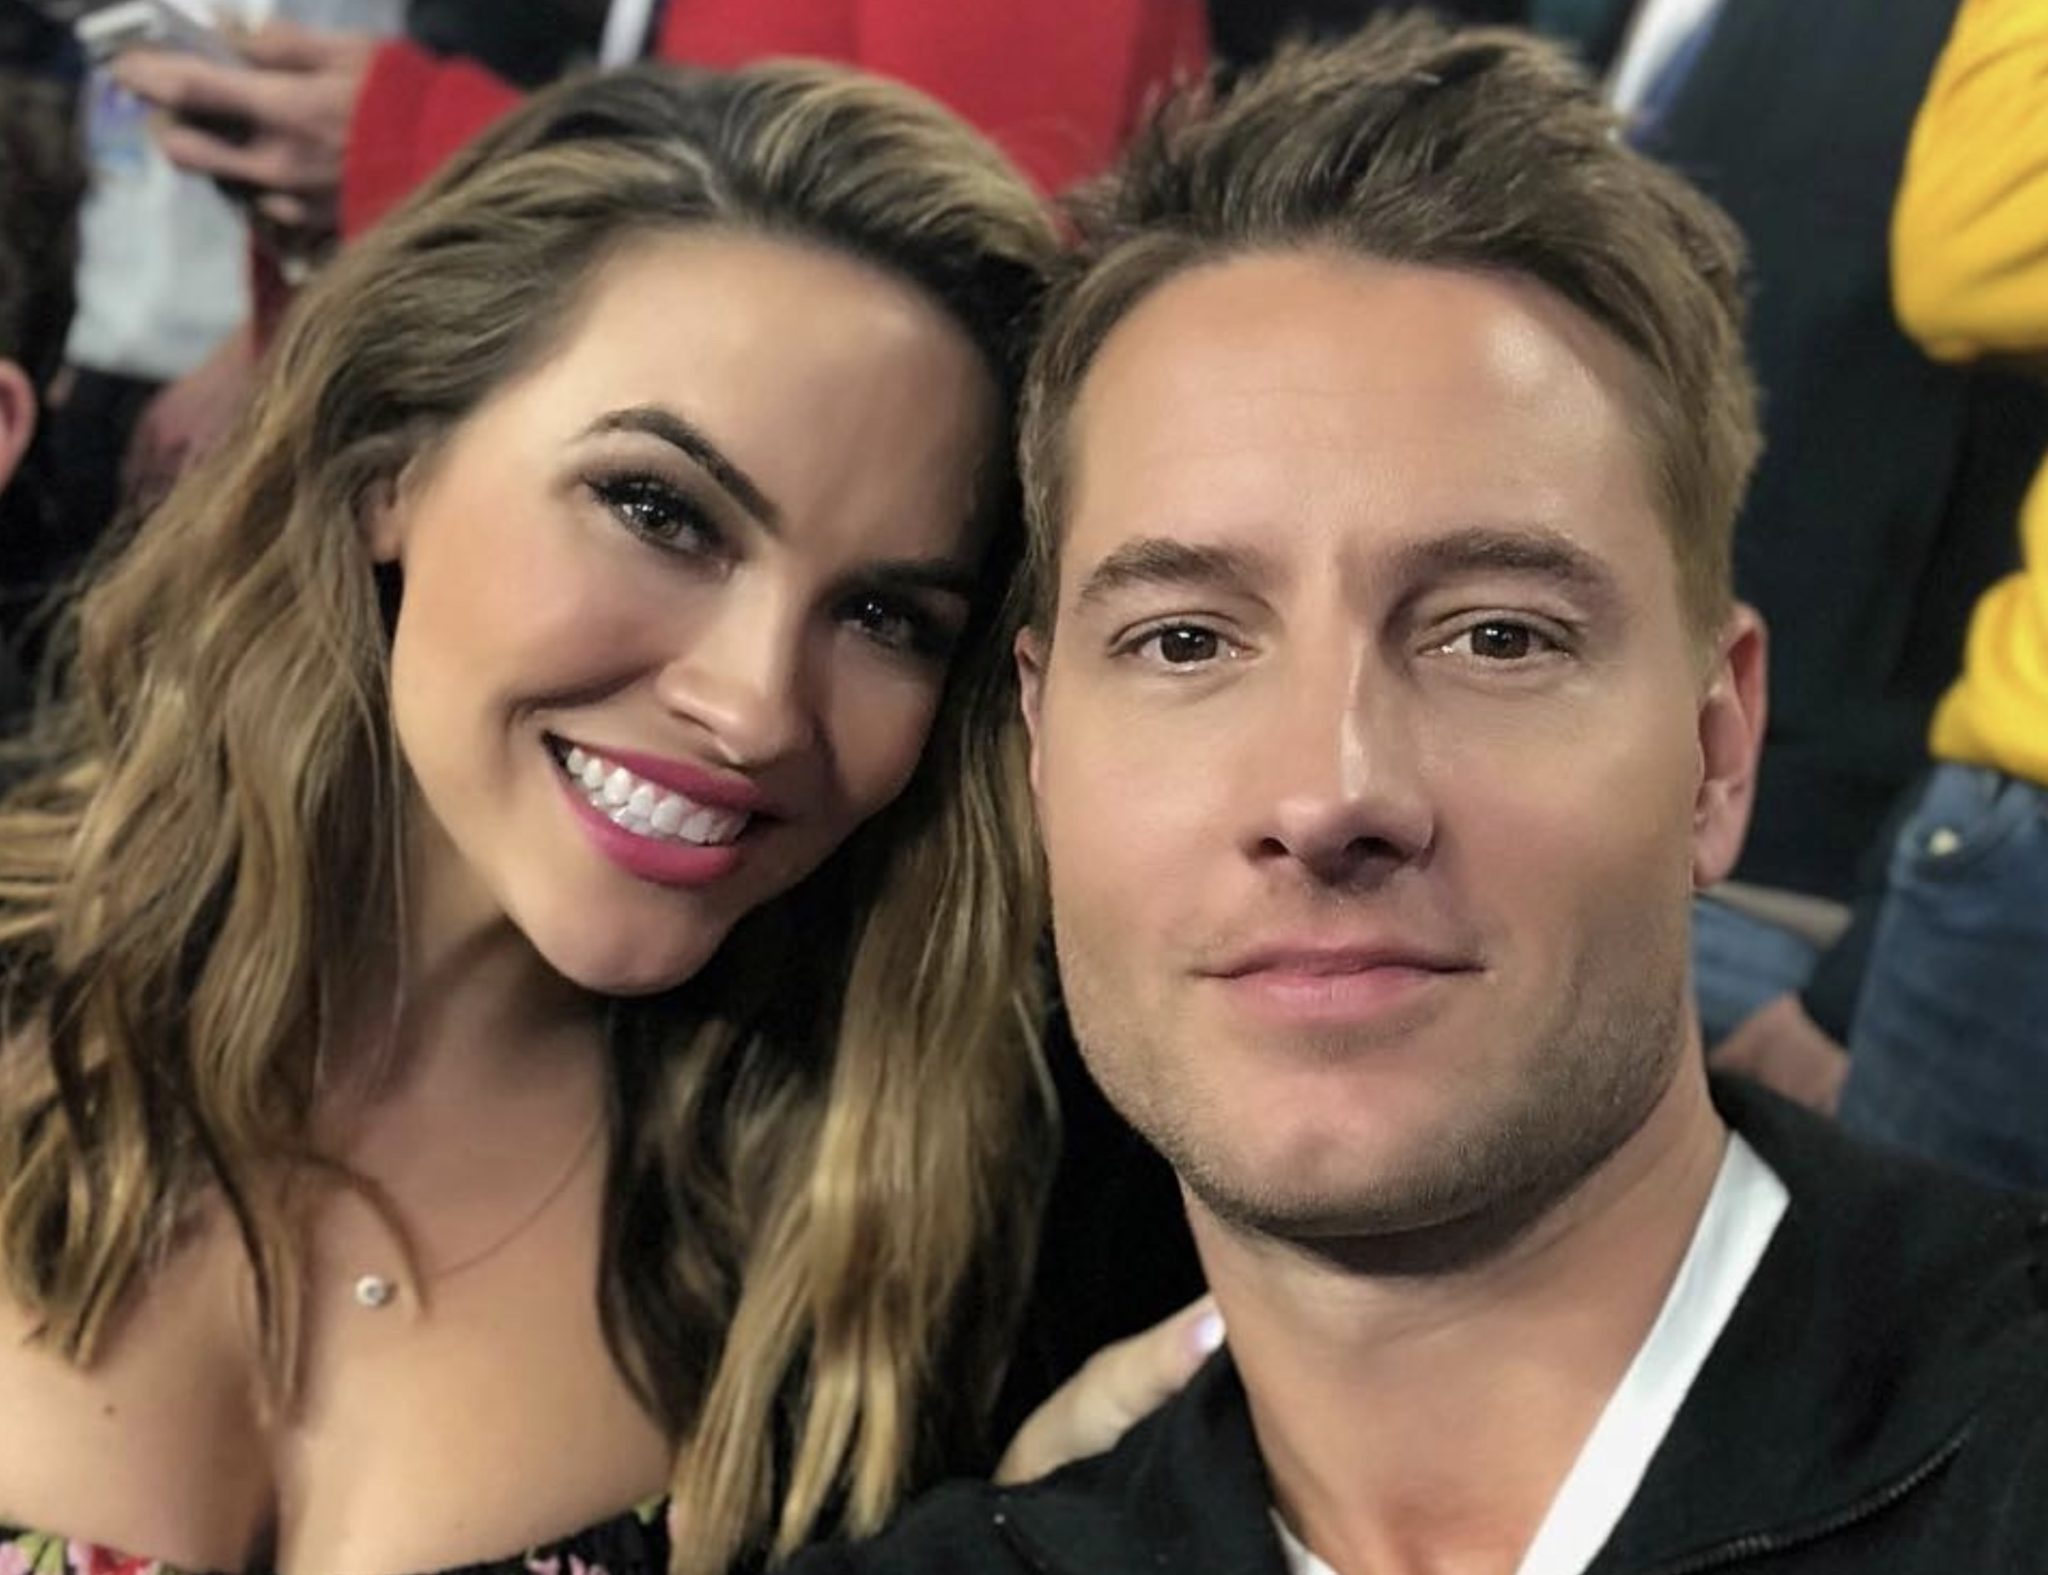 Chrishell Stause, Selling Sunset, Justin Hartley, This Is Us-https://www.instagram.com/p/Bey8u8gh5tR/